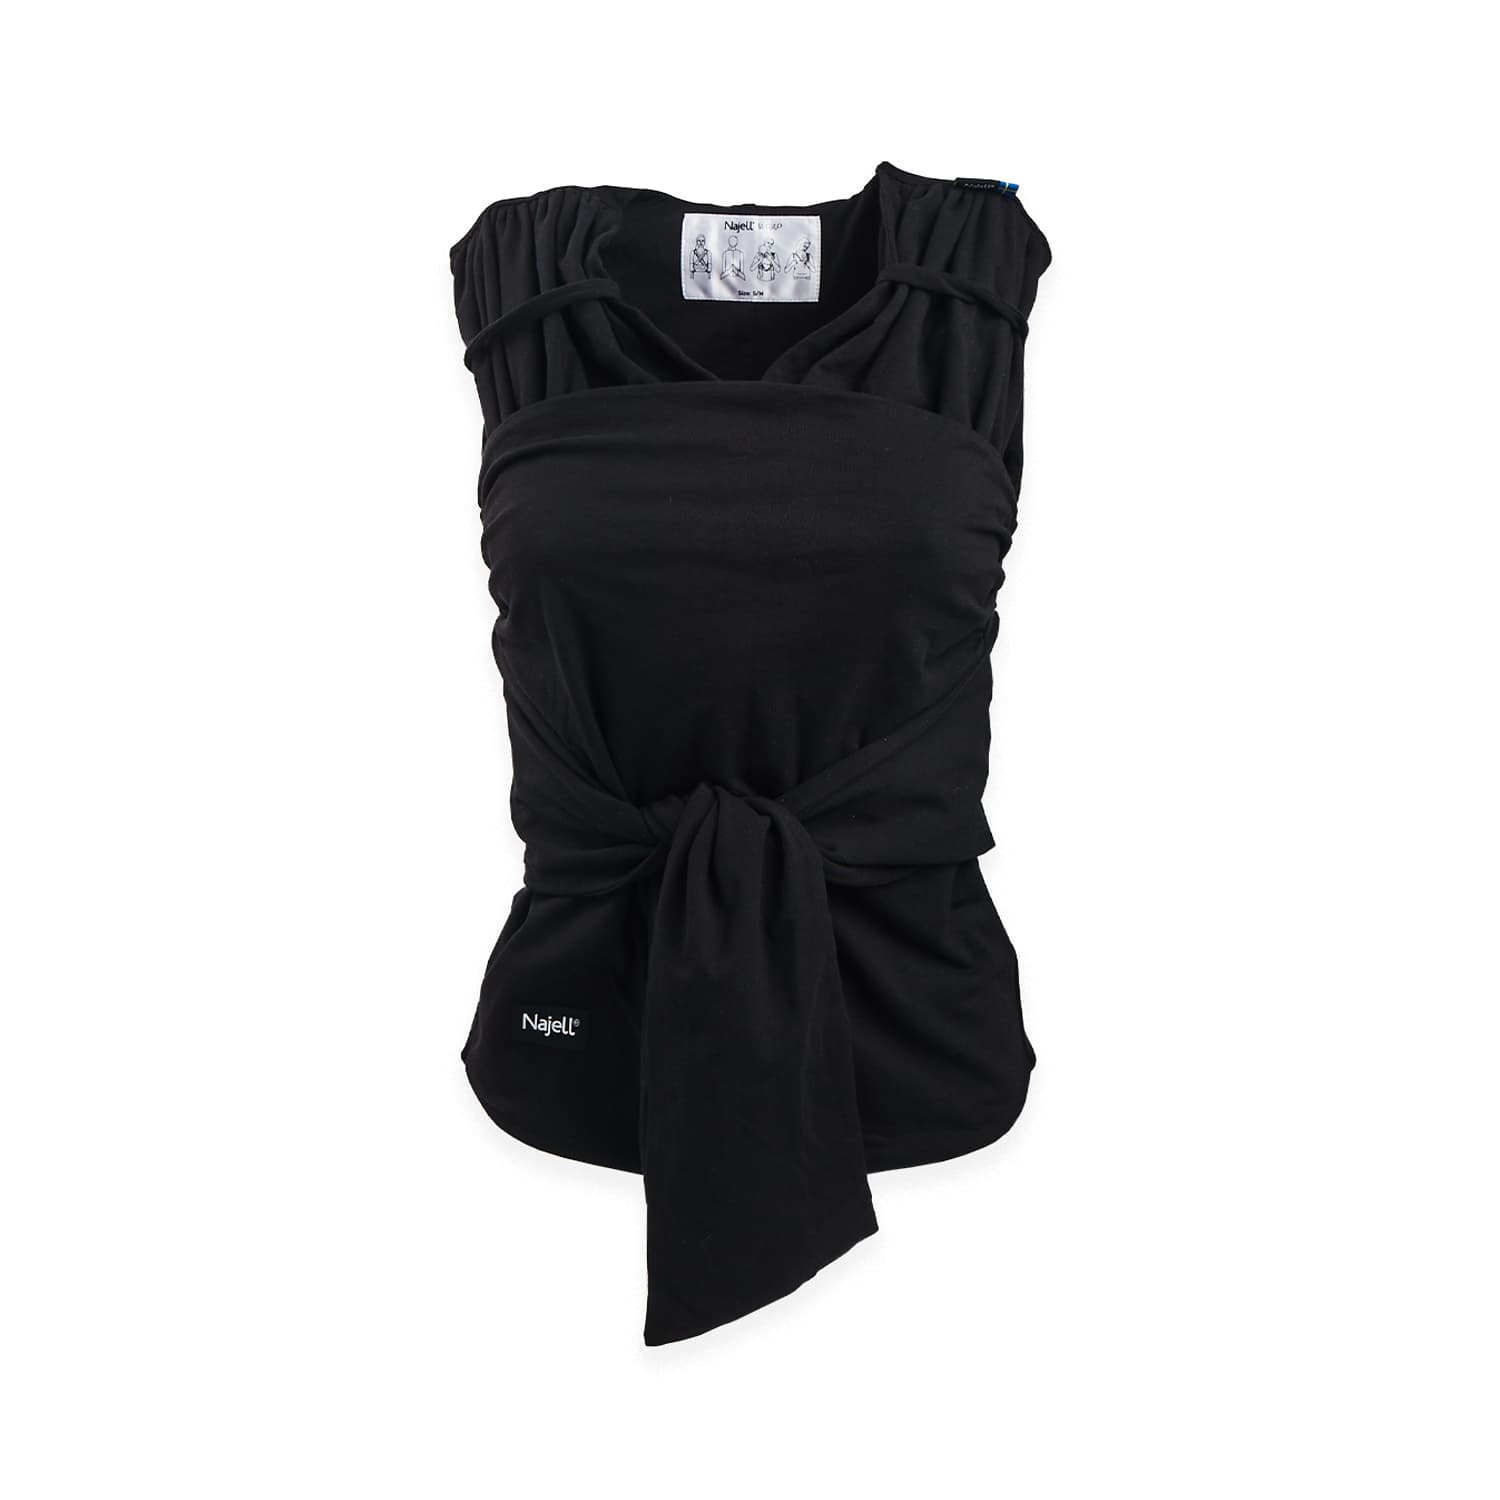 Baby Wrap Carrier (Black)